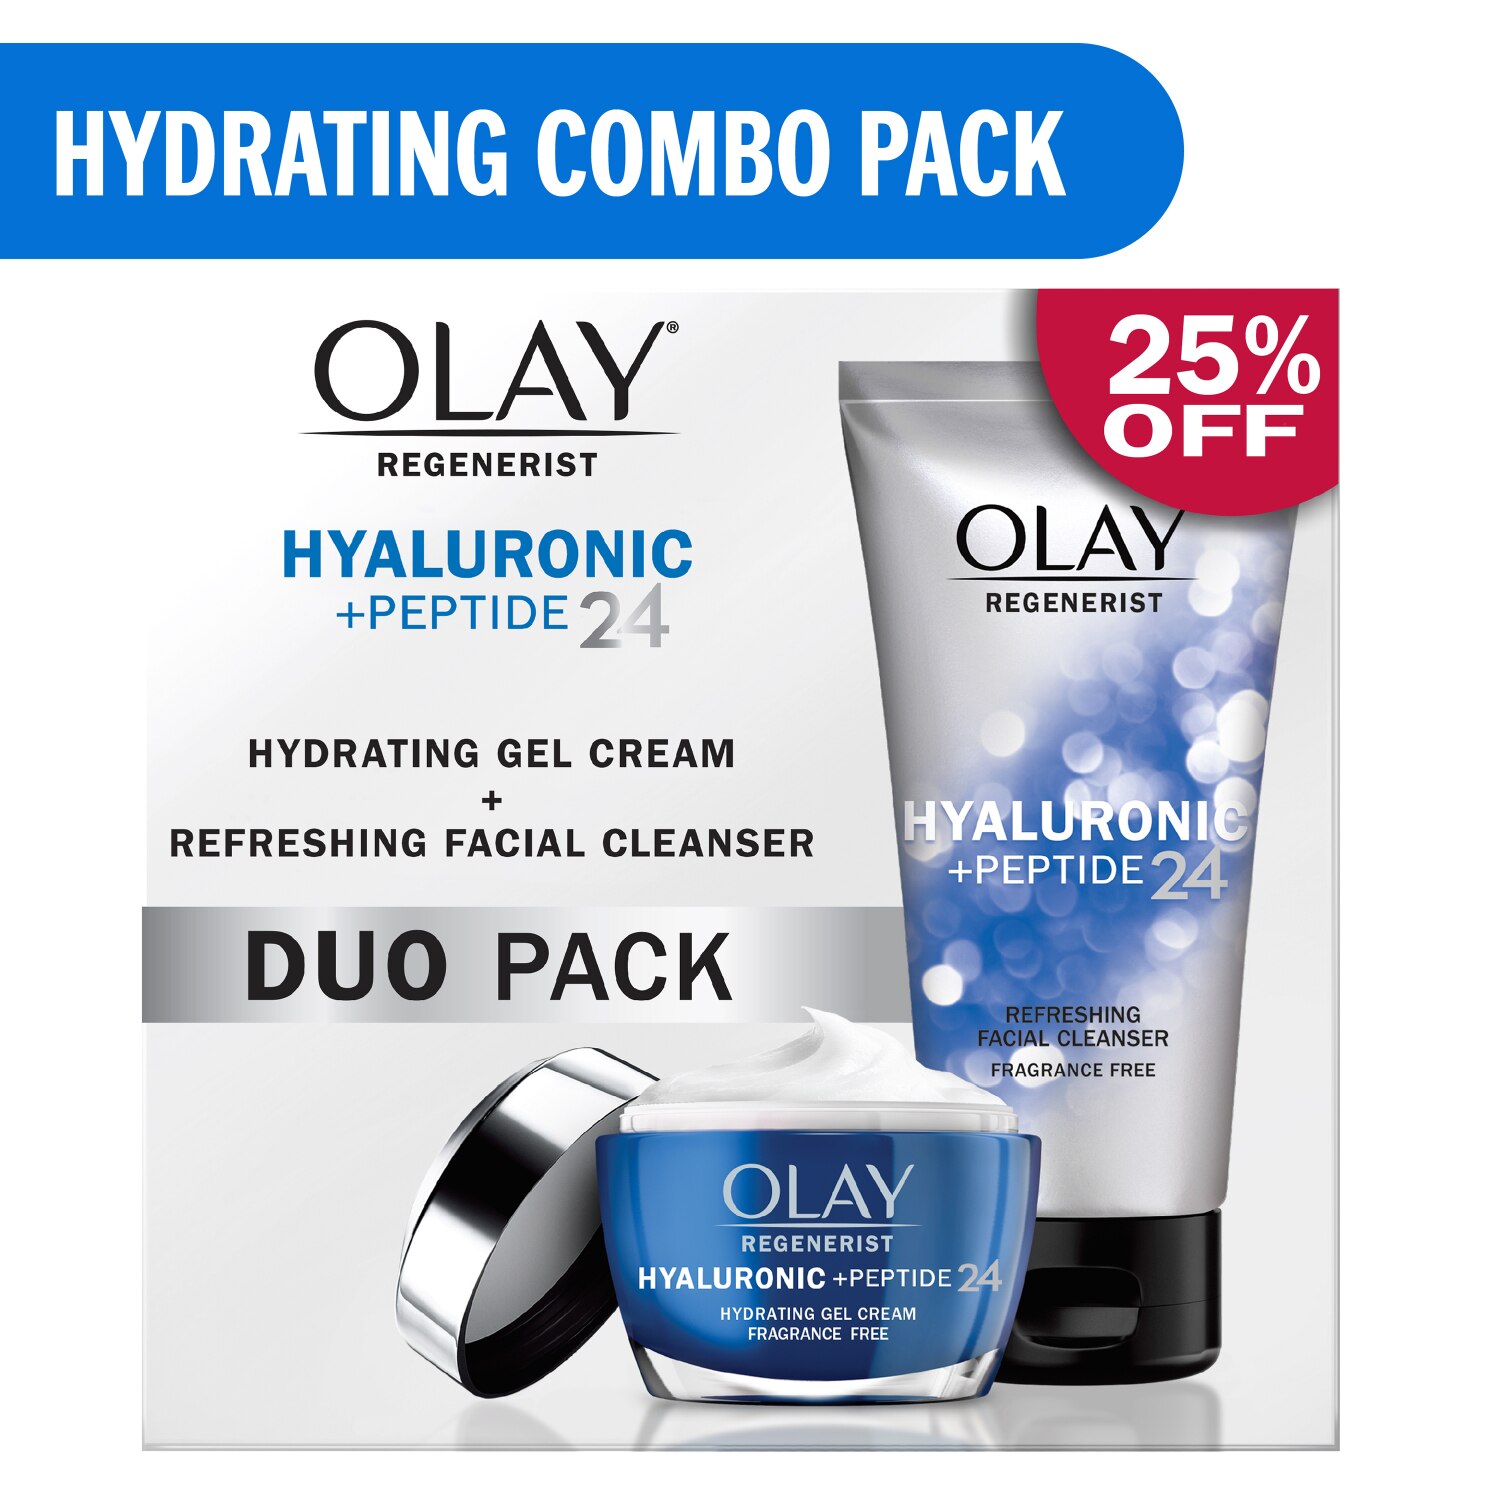 Olay Hyaluronic + Peptide 24 Face Wash + Moisturizer Duo Pack